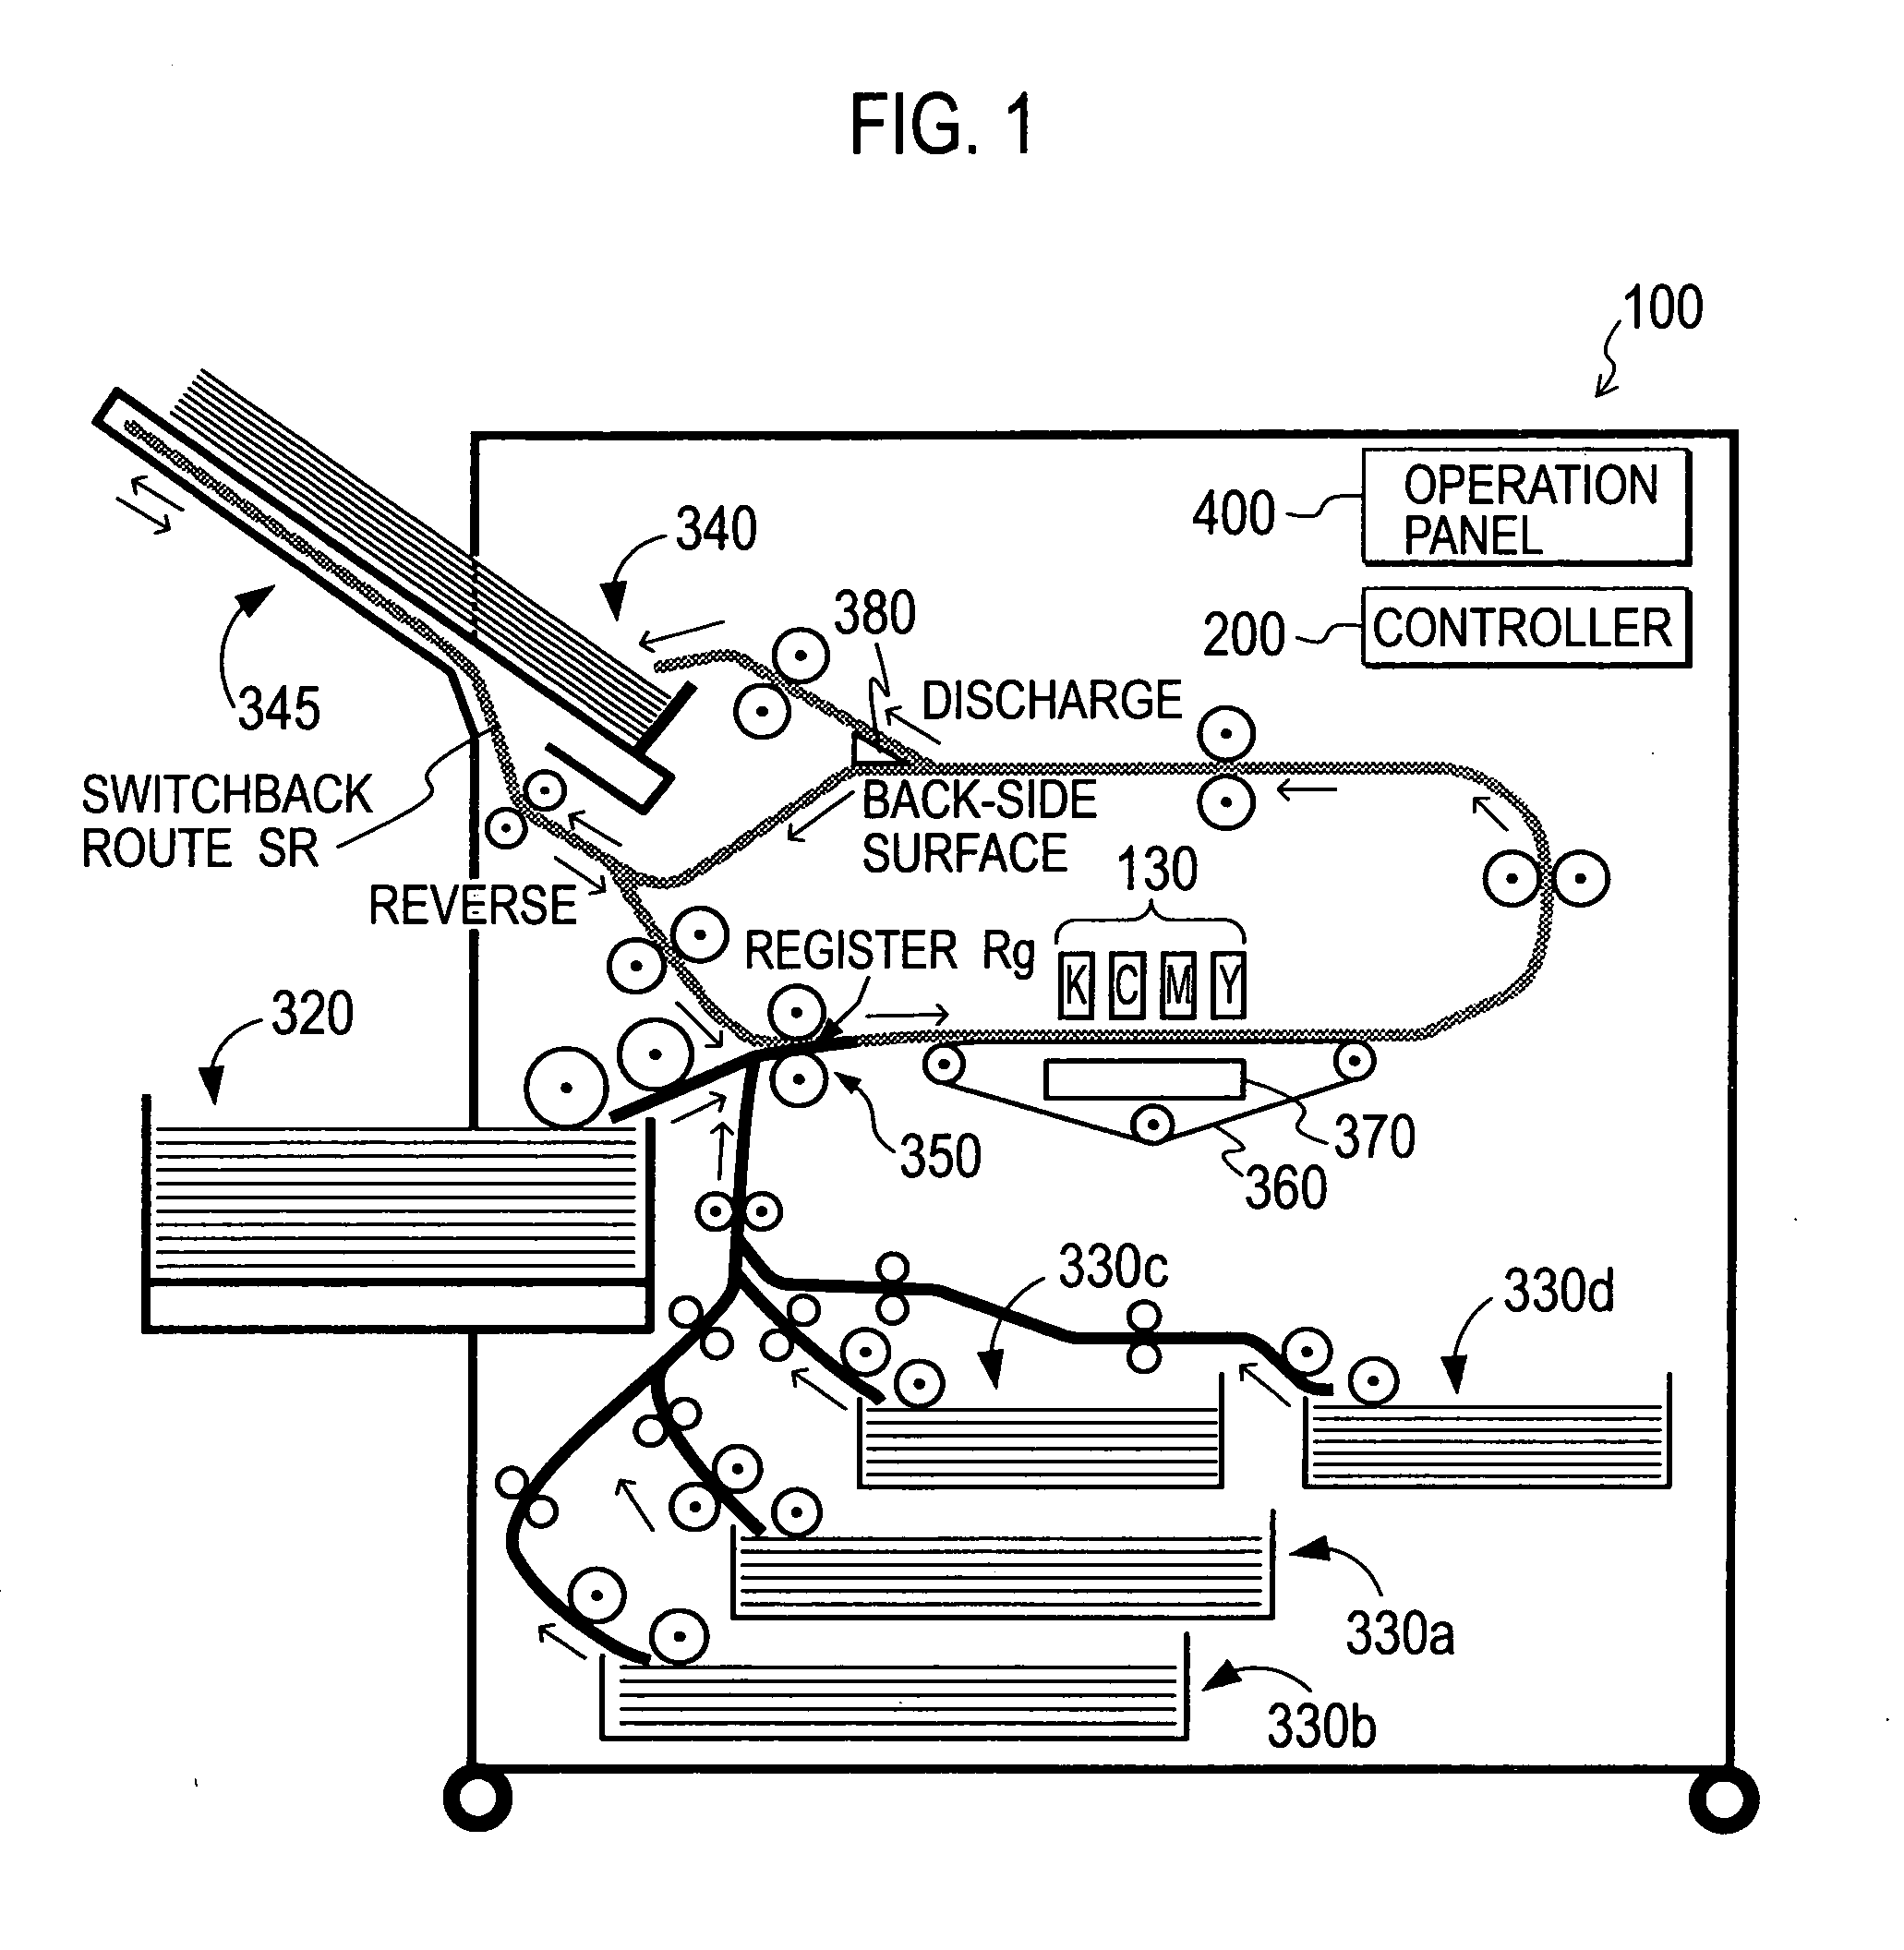 Inkjet image-forming apparatus and method for printing